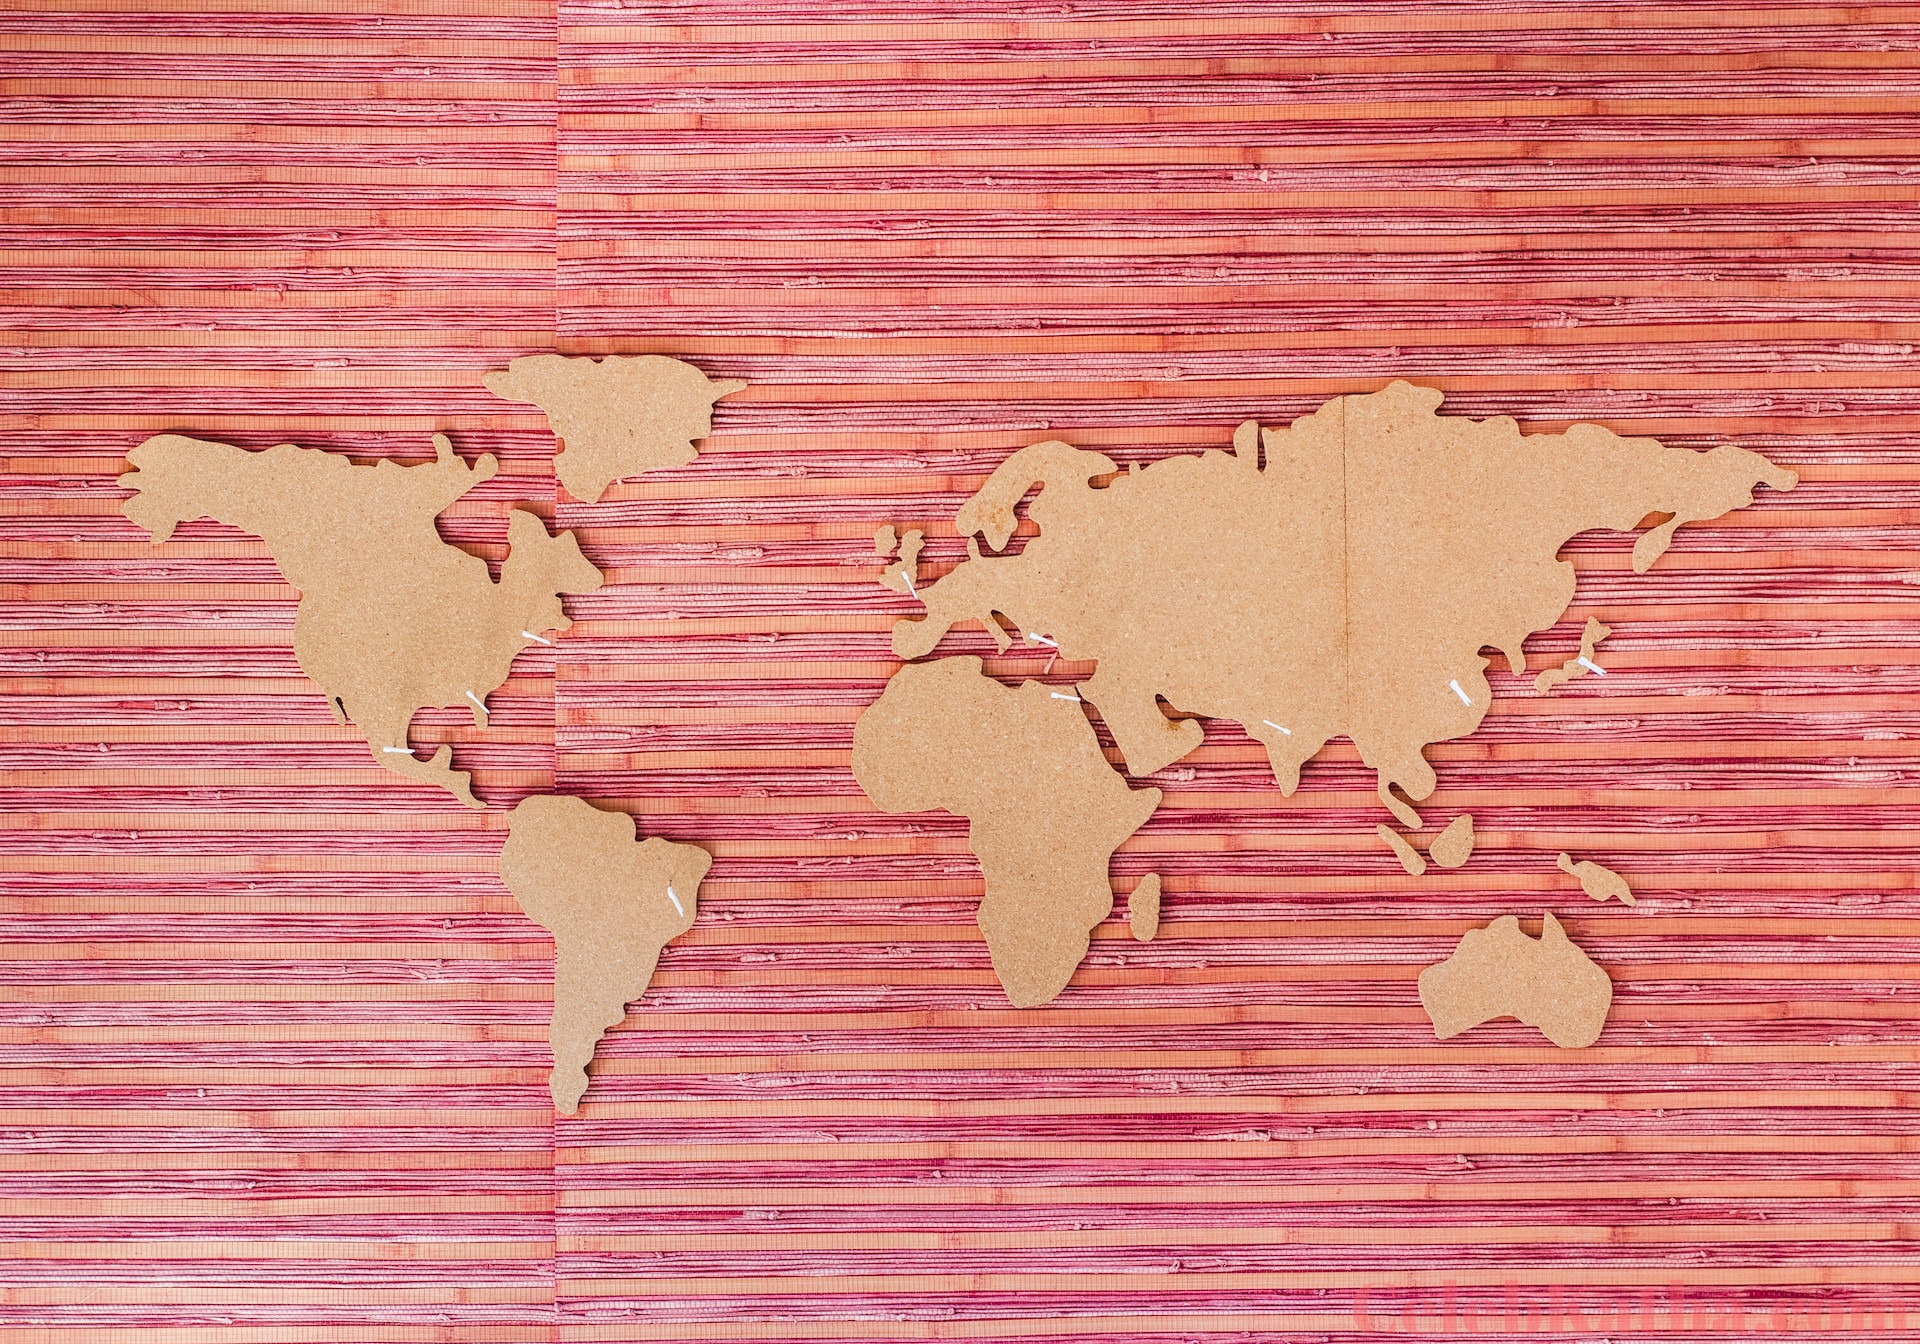 Wooden map of the world